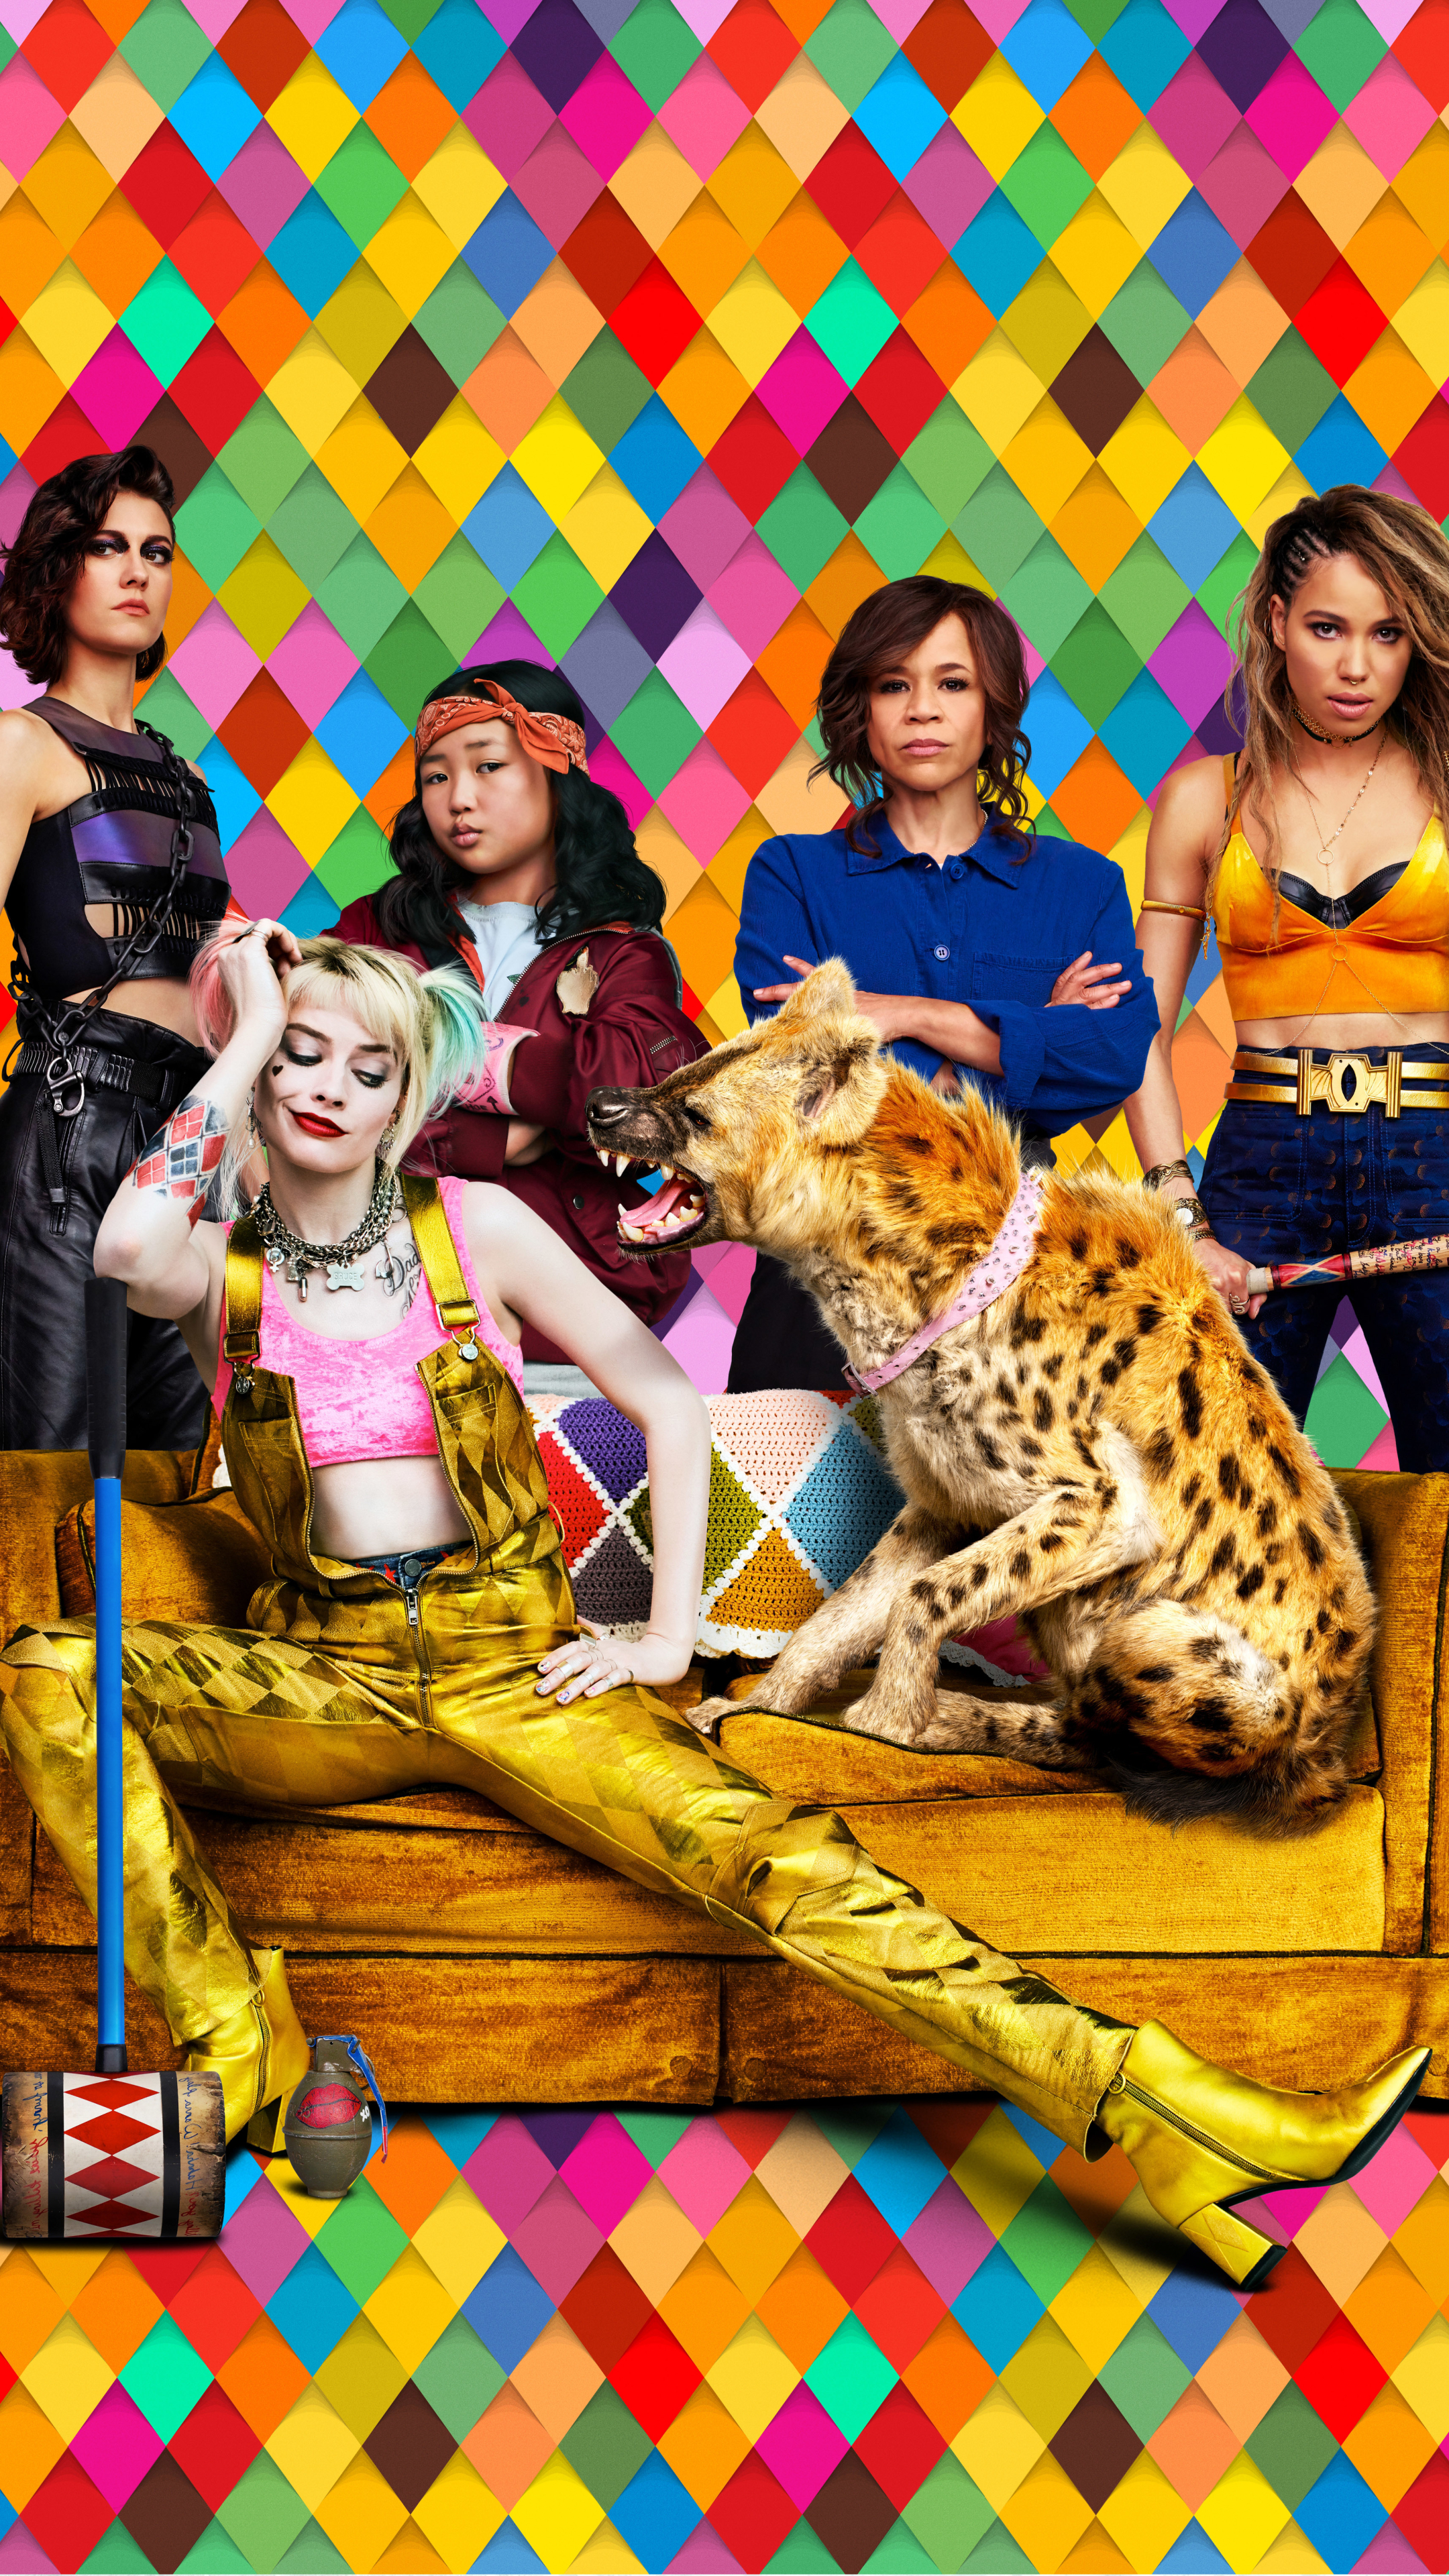 Birds of Prey (and the Fantabulous Emancipation of One Harley Quinn) Phone Wallpaper